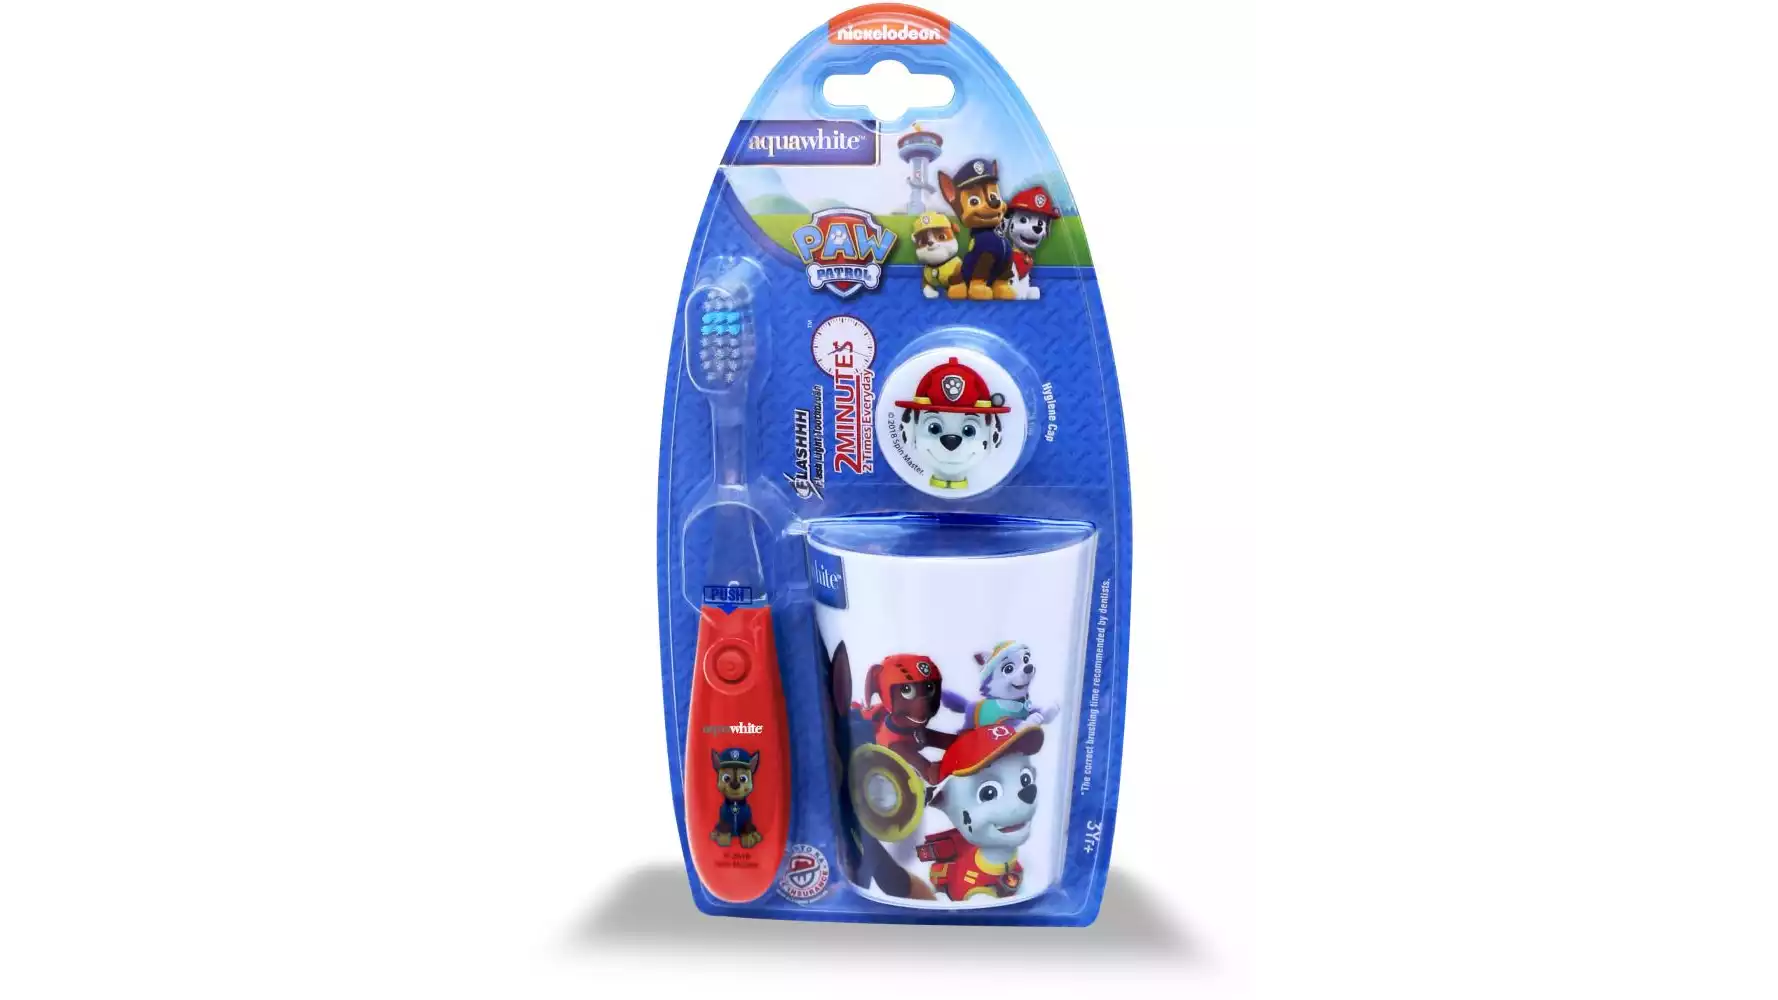 Aquawhite Paw Patrol Flashhh Toothbrush Rinsing Cup & Hygiene Cap - Red {Kids Timer Flashlight Toothbrush Waterproof, Shockproof With Non-Replaceable In-Built Battery With} (3Pack)